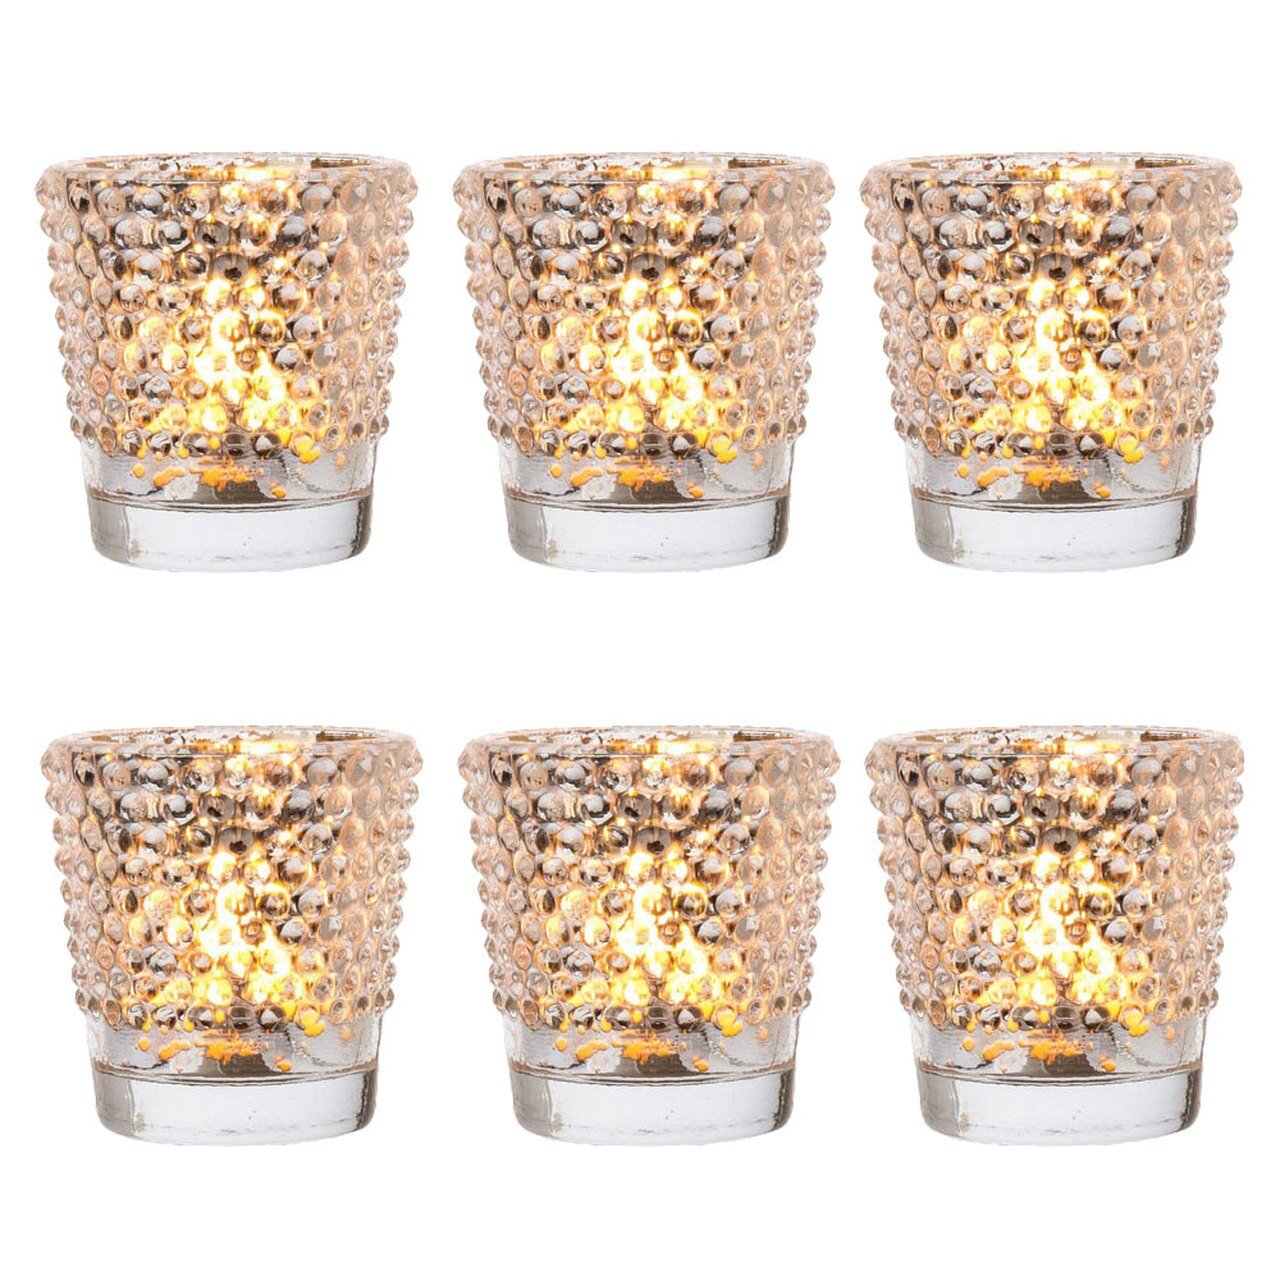 6 Pack | Hobnail Vintage Mercury Glass Glass Candle Holders (2.5-Inch, Candace Design, Silver) - For Use with Tea Lights - For Home Decor, Parties, and Wedding Decorations - AsianImportStore.com - B2B Wholesale Lighting & Decor since 2002